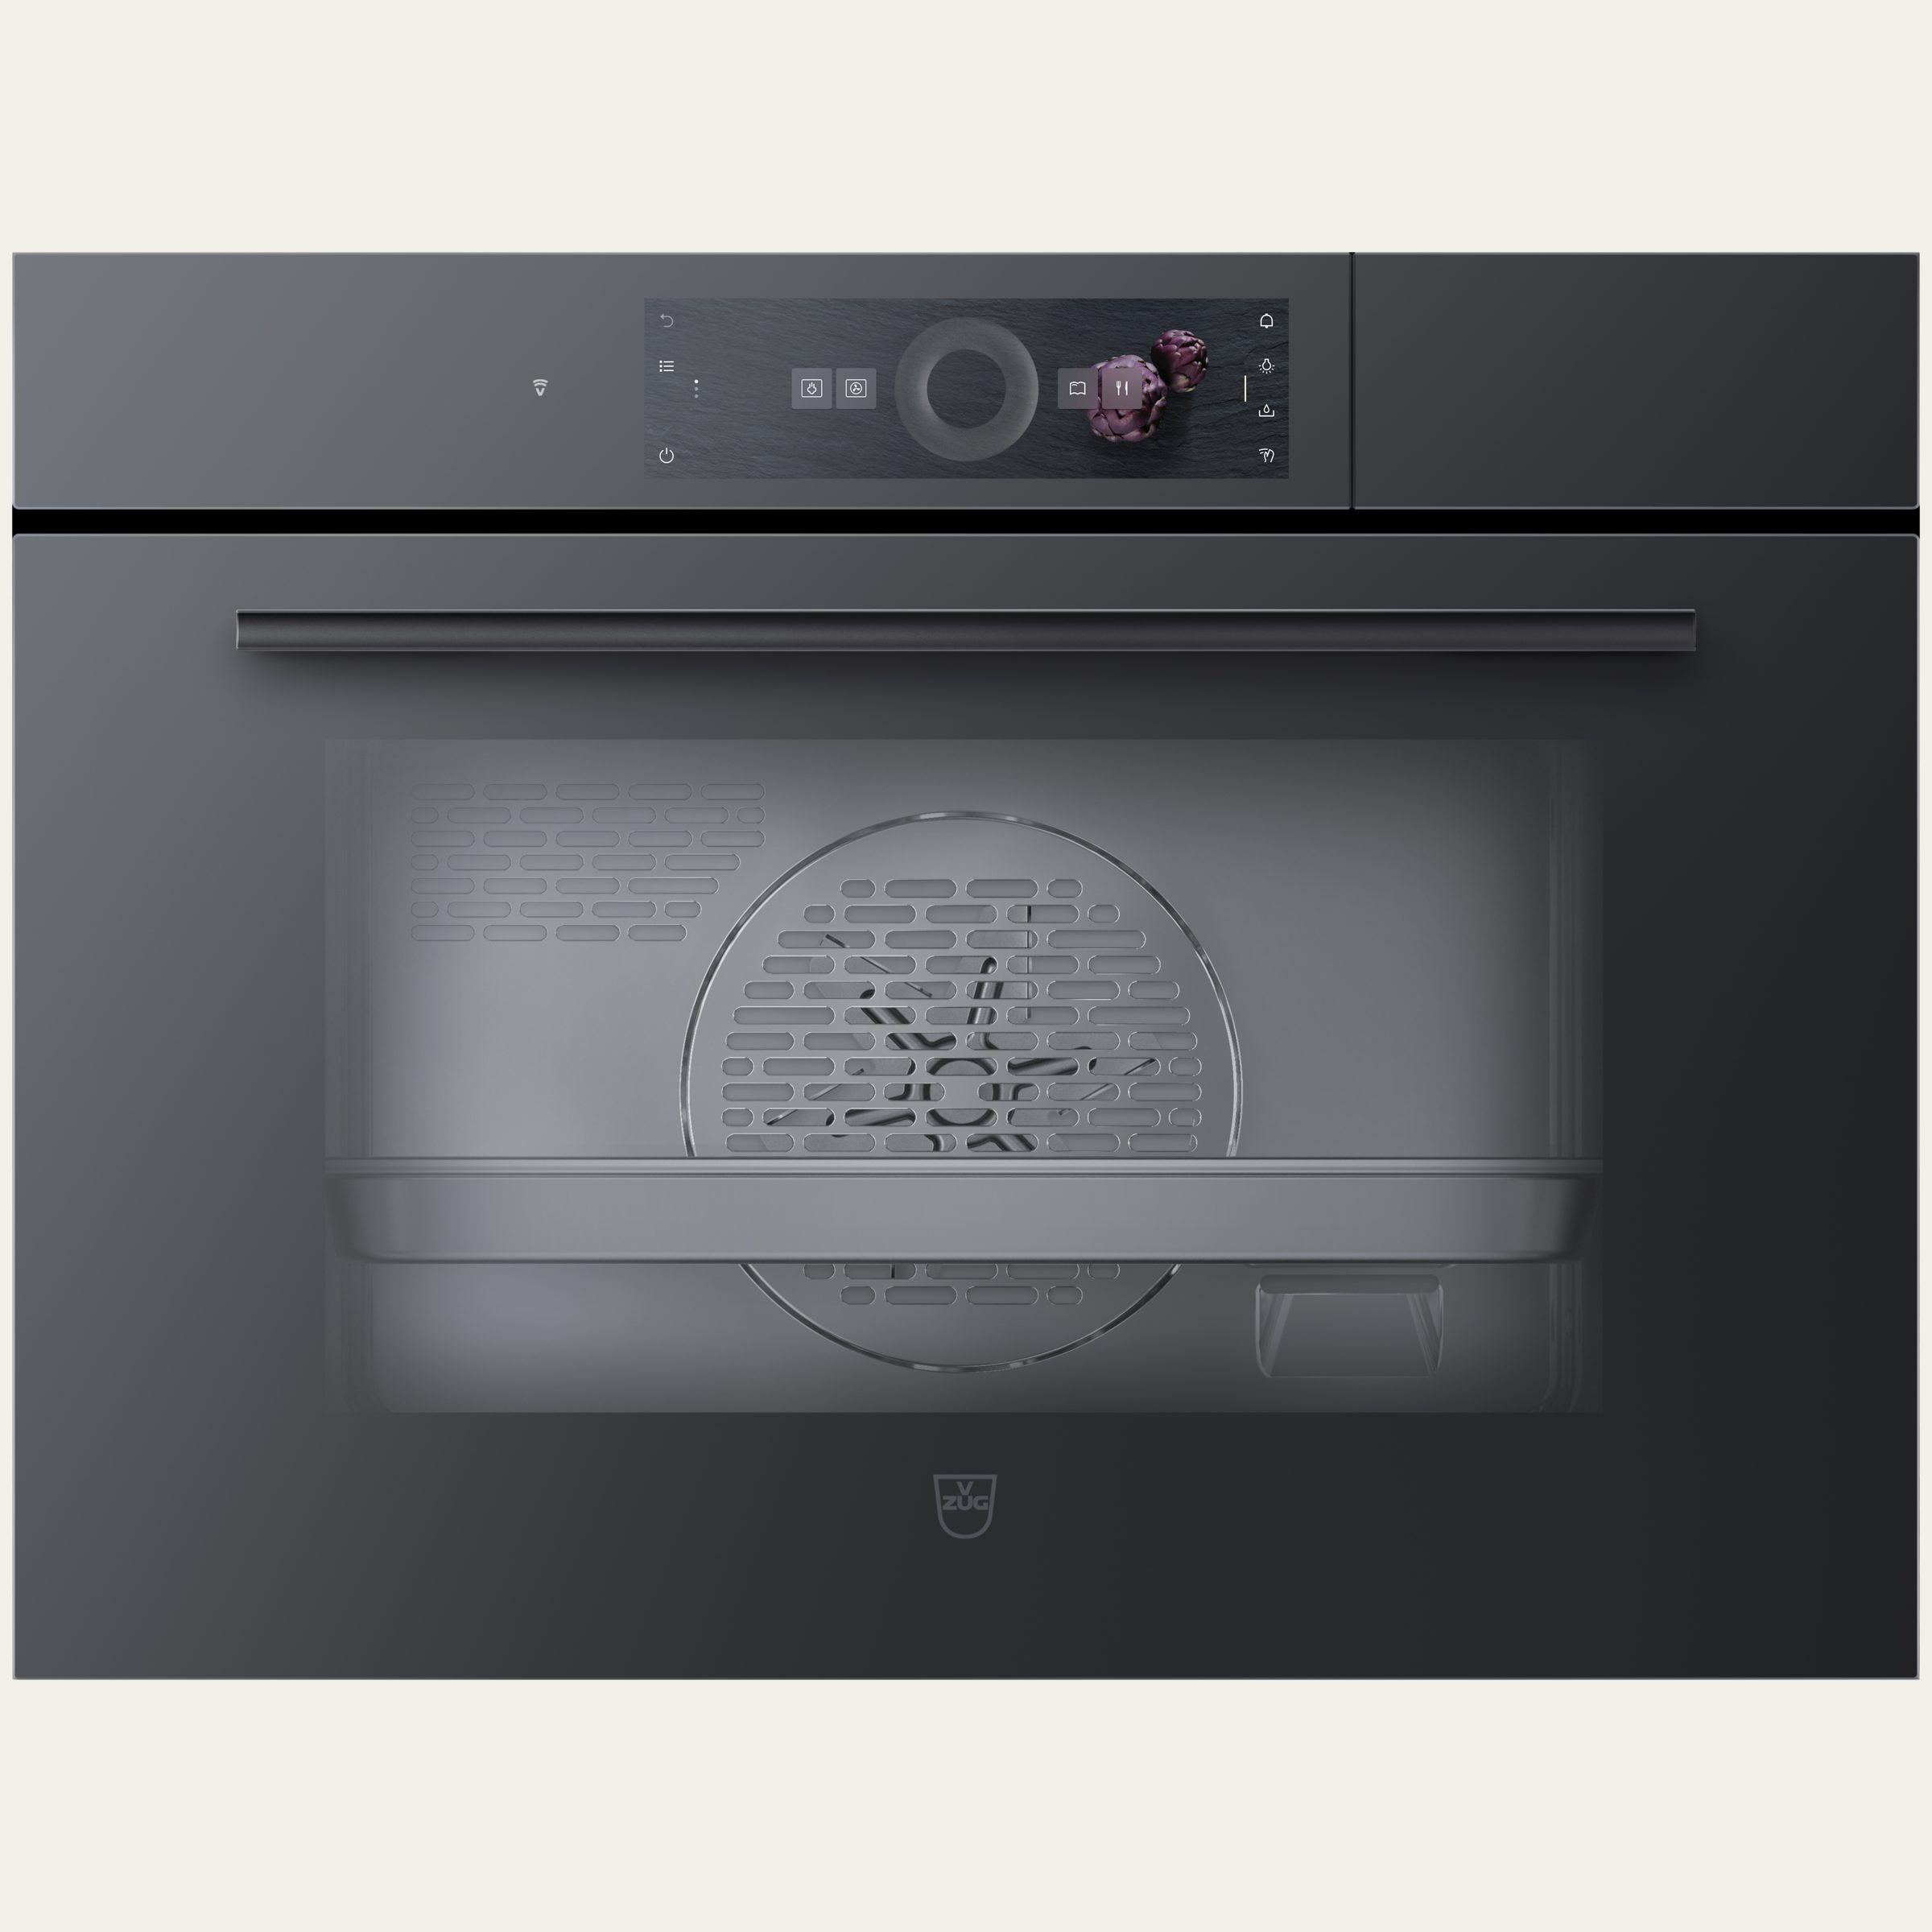 V-ZUG Steam cooker CombiSteamer V6000 45F, Standard width: 60 cm, Standard height: 45 cm, Black mirror glass, Touchscreen with Circleslider, V-ZUG-Home, Fixedwater and drain connection